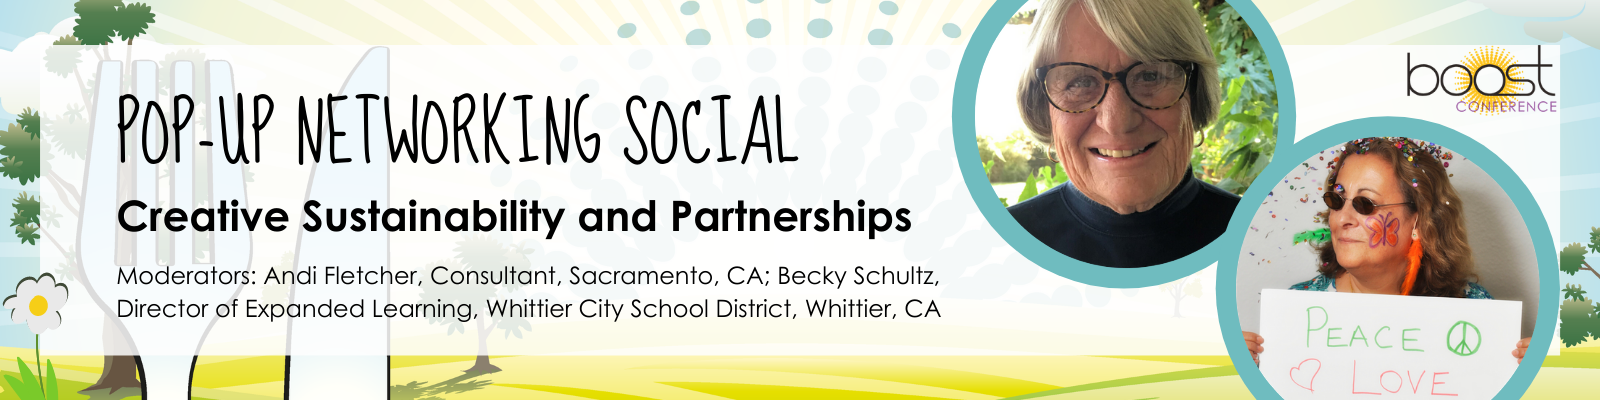 Creative Sustainability and Partnerships Moderators: Andi Fletcher, Consultant, Sacramento, CA; Becky Schultz, Director of Expanded Learning, Whittier City School District, Whittier, CA